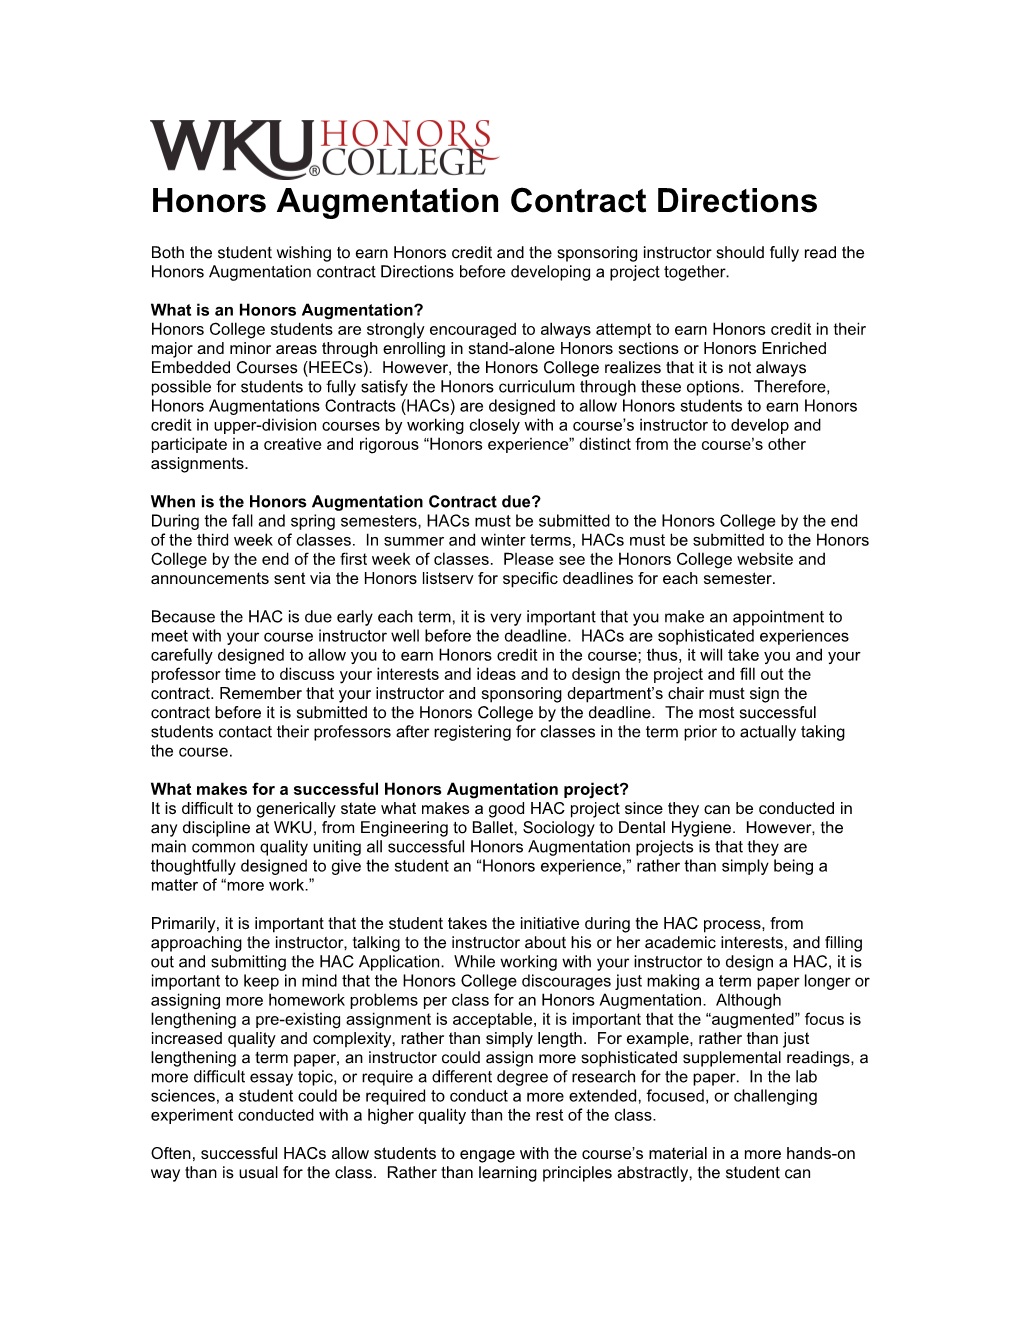 Honors Augmentation Contractdirections